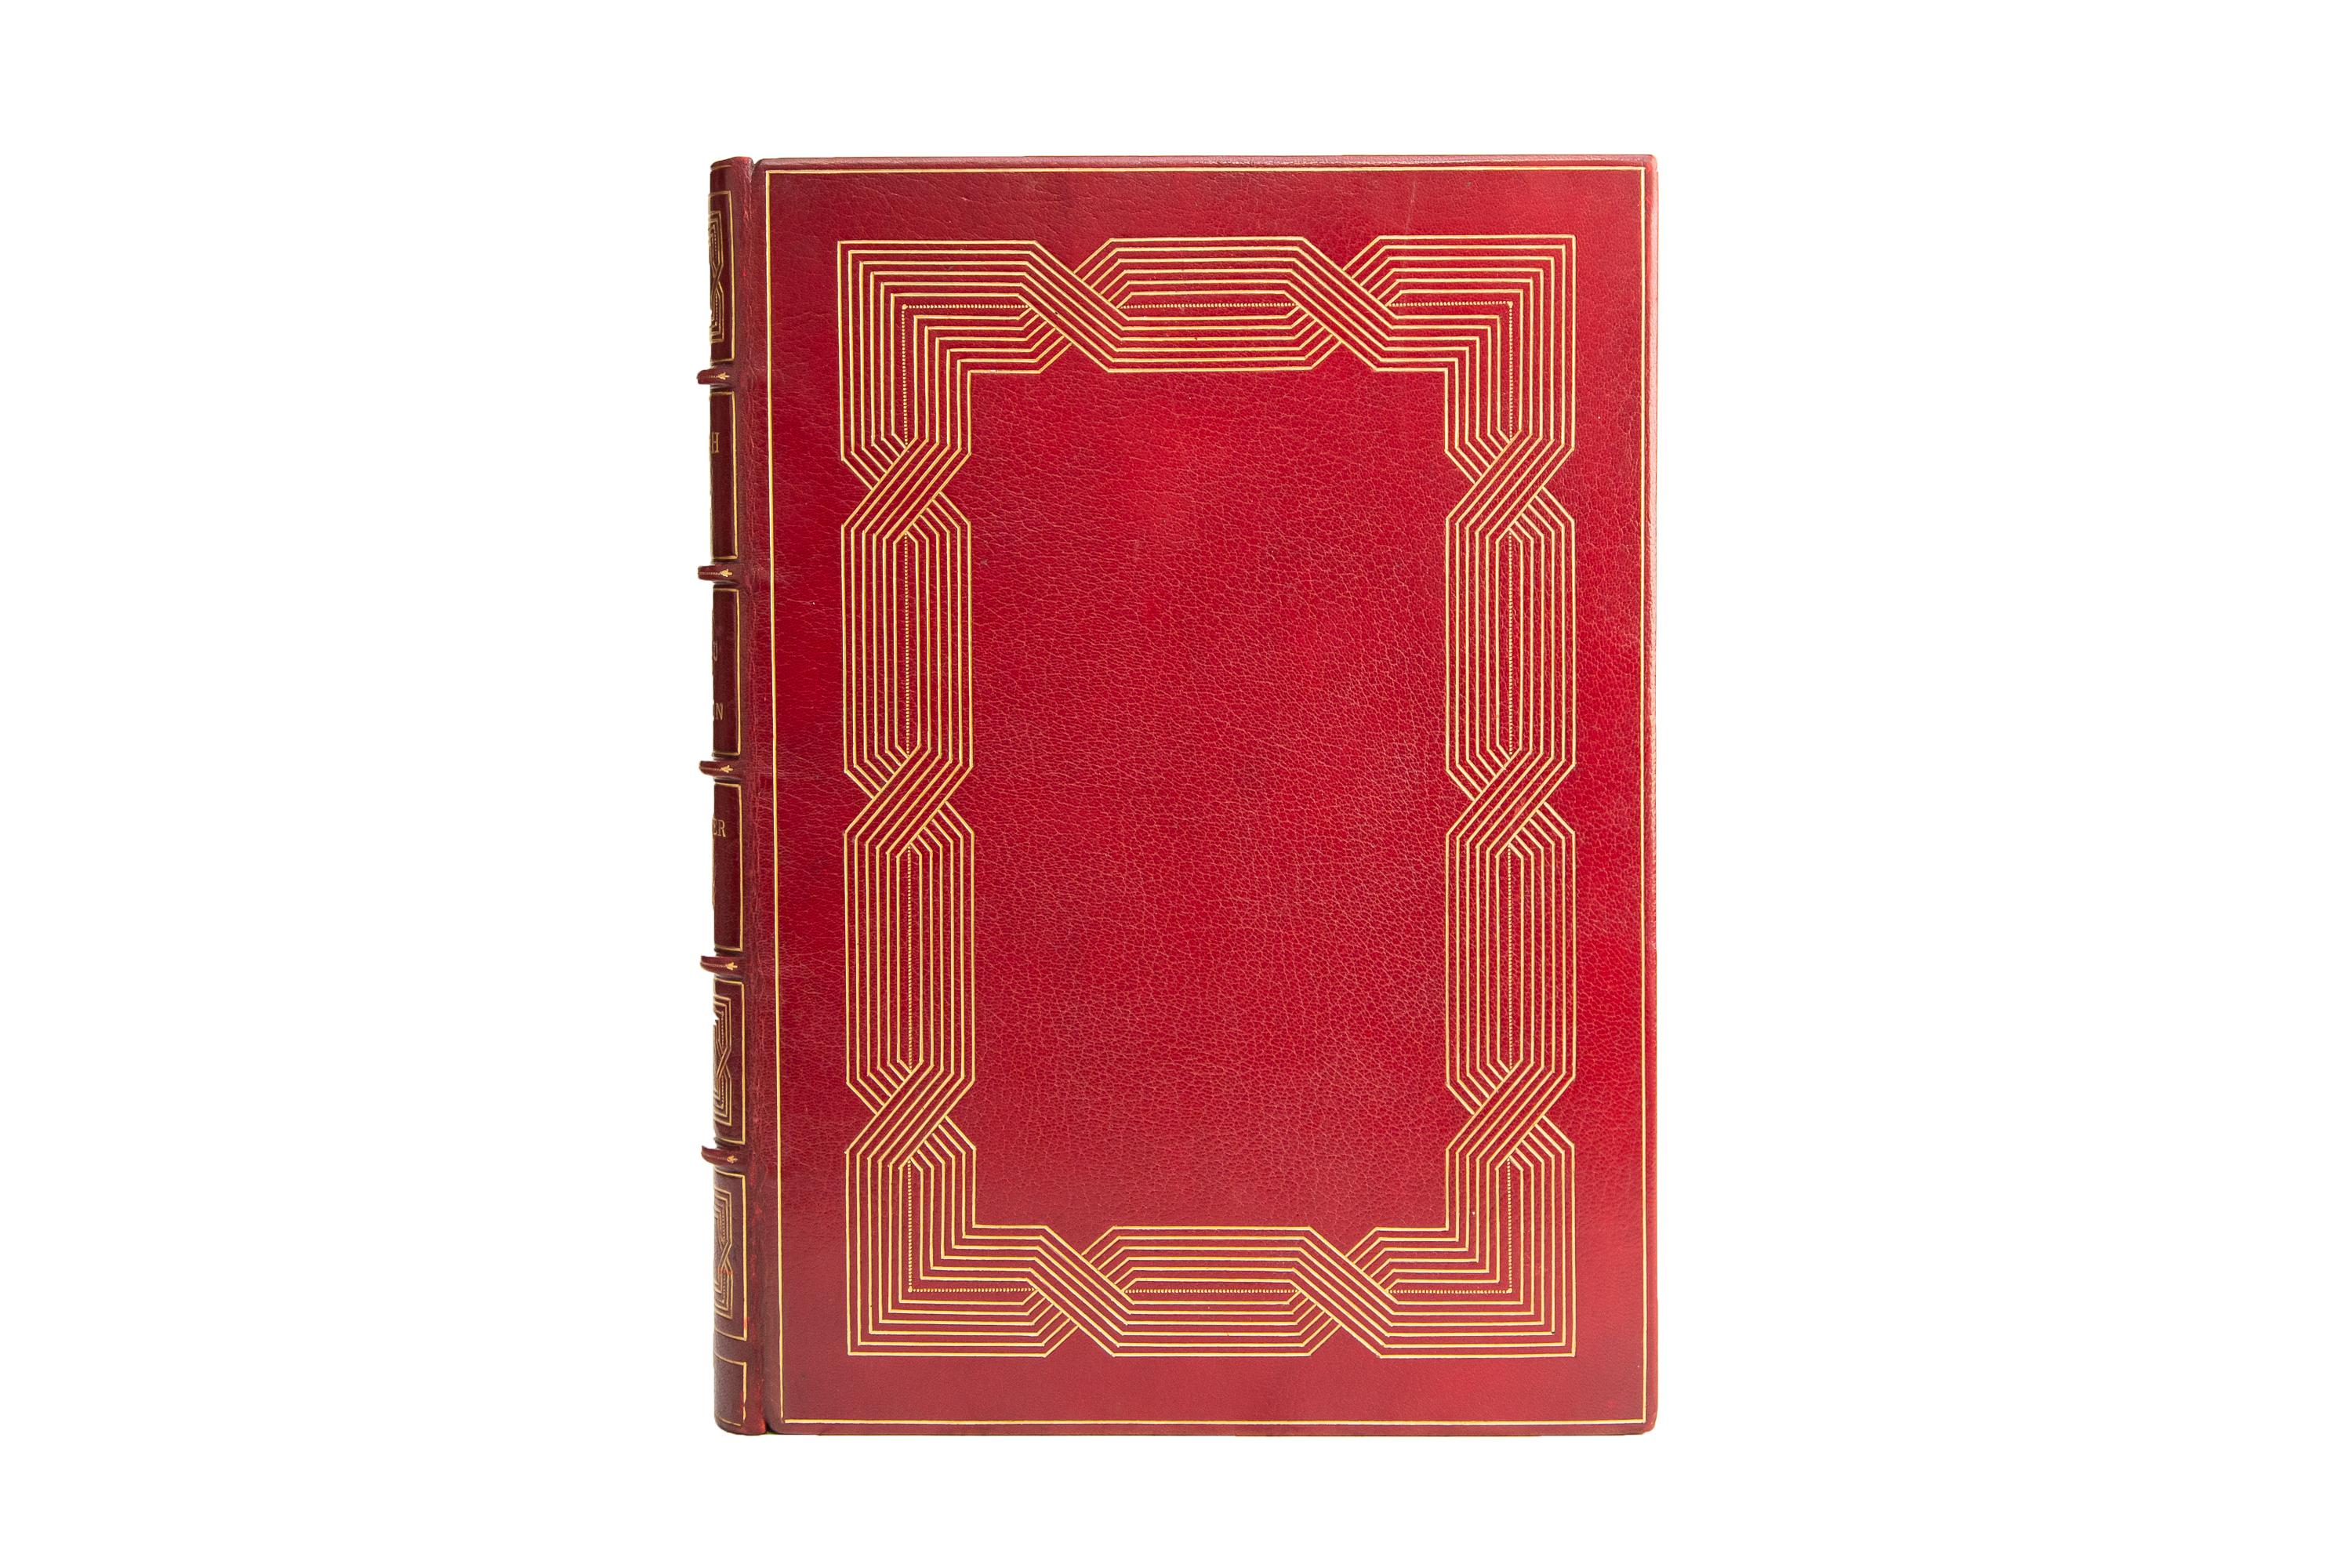 3 Volumes. J.J. Foster, French Art from Watteau to Prud'hon. First Edition. Bound by Zahnsdorf in full red morocco with an elaborate geometrical bordering gilt-tooled design on the front and rear boards. The spines display raised bands, dotted in